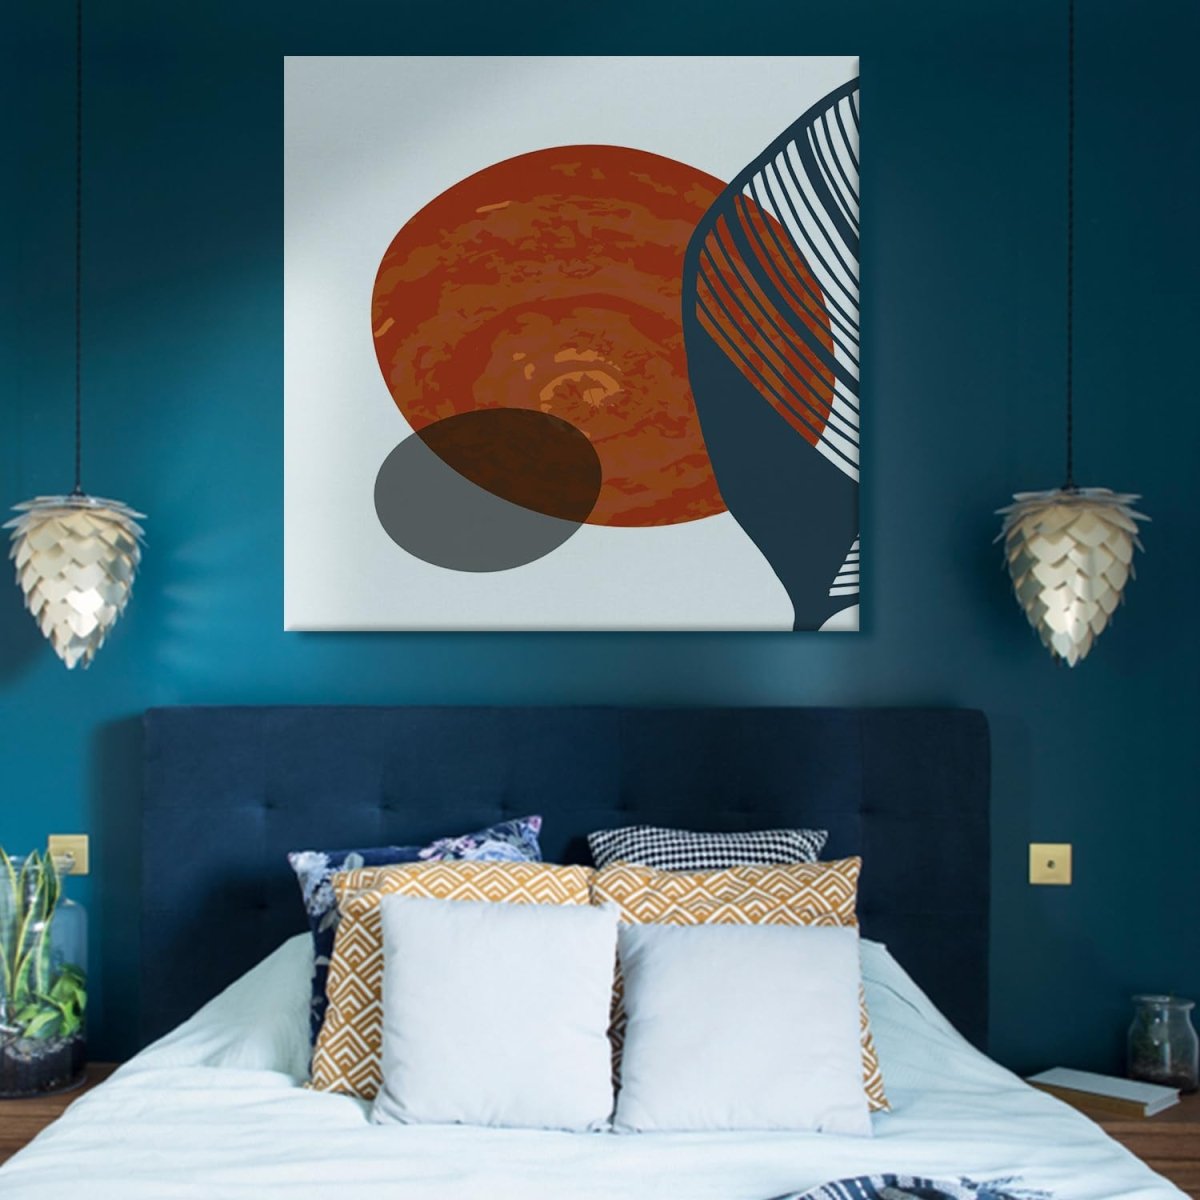 Venn Circle and Spring Canvas Wall Painting (36 x 36 Inches)